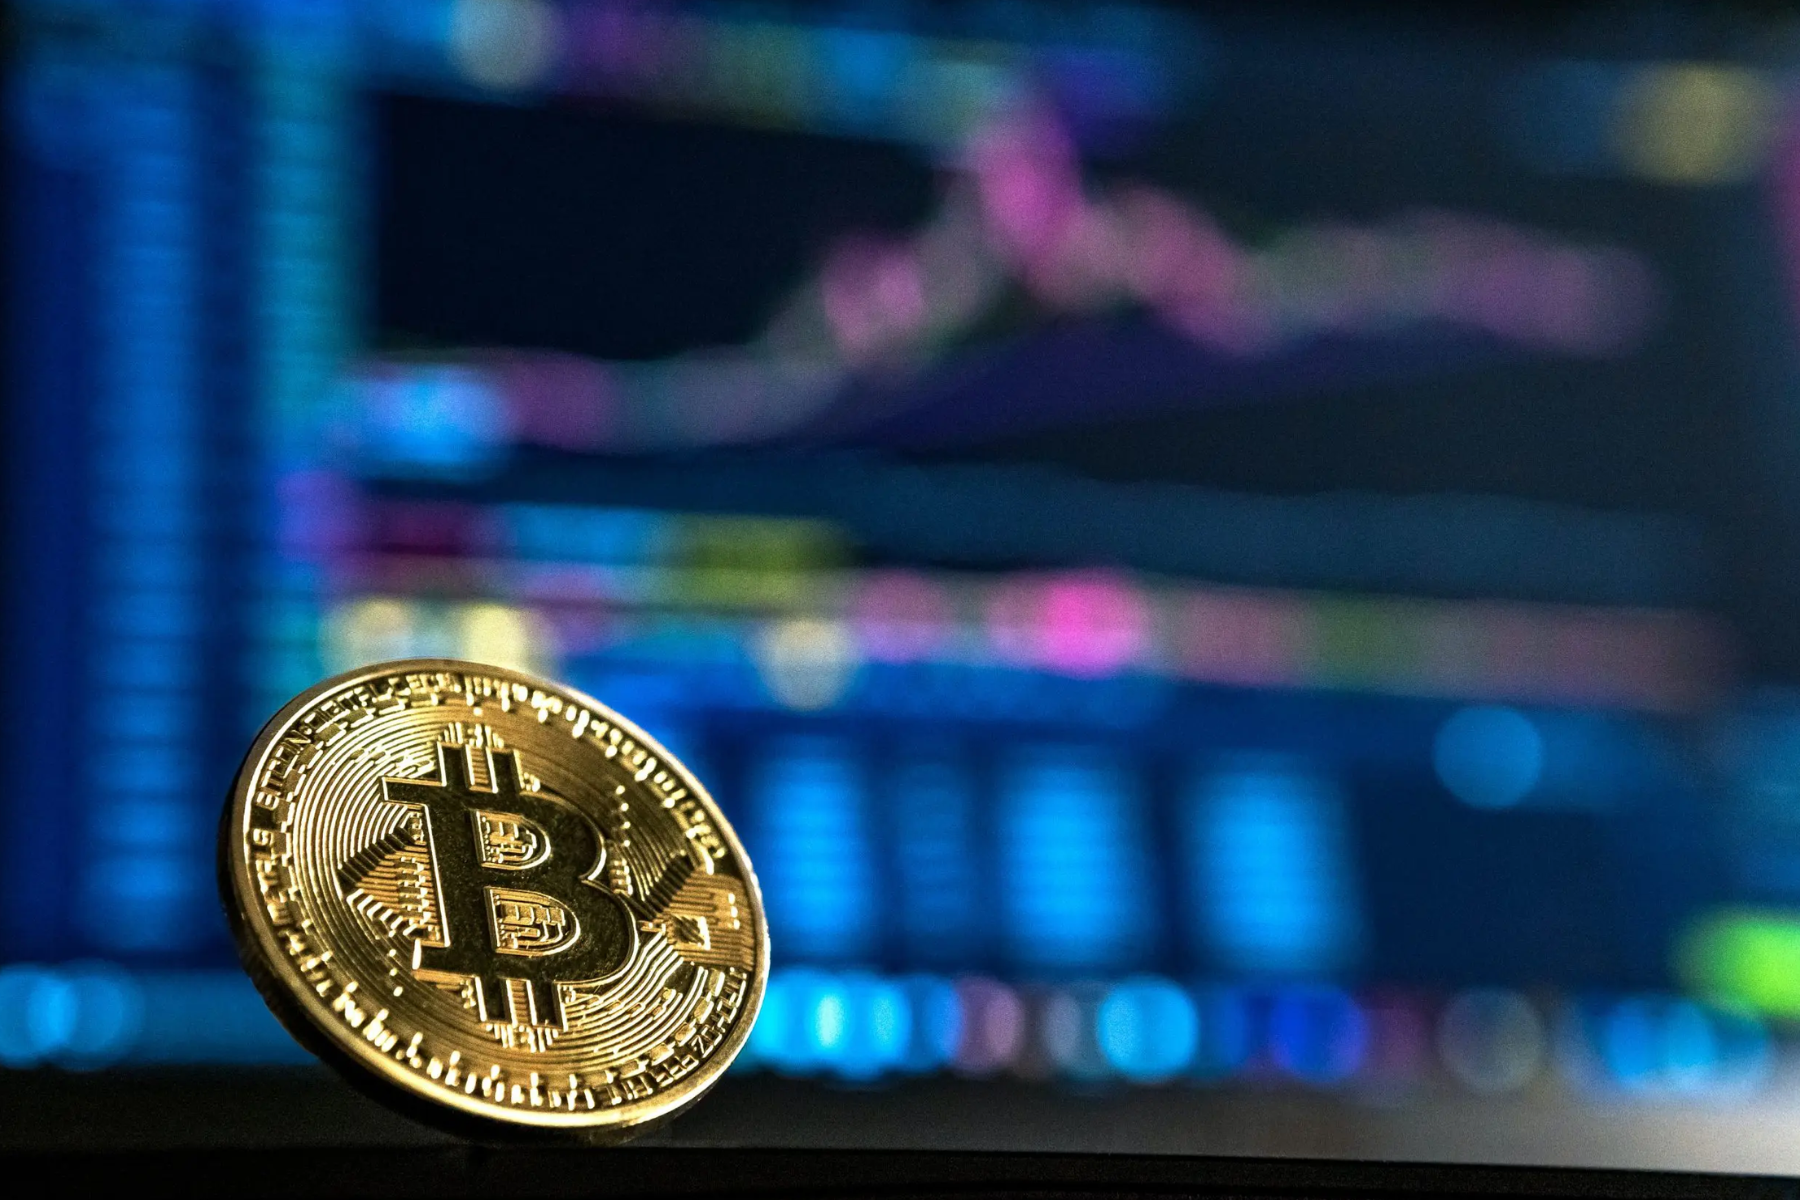 A bitcoin in front of a hazy monitor display